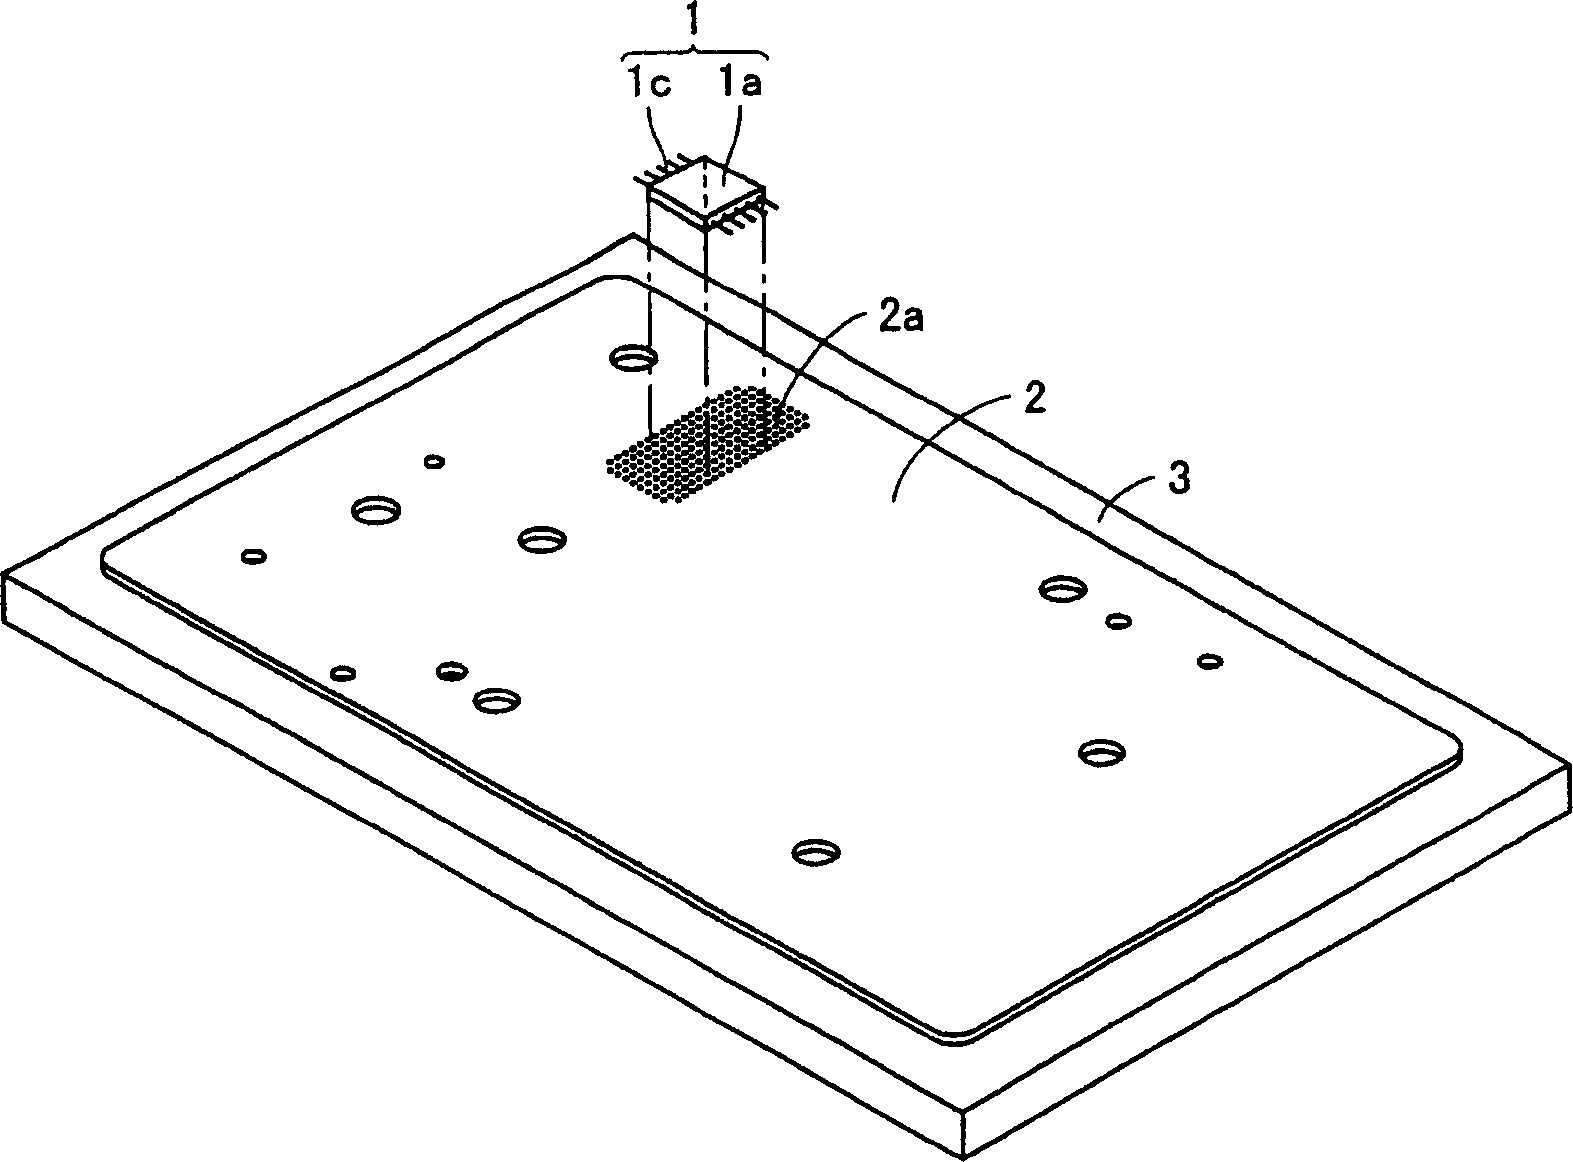 Substrate for mounting microwave chip integrated circuit and microwave communication generator and transceiver